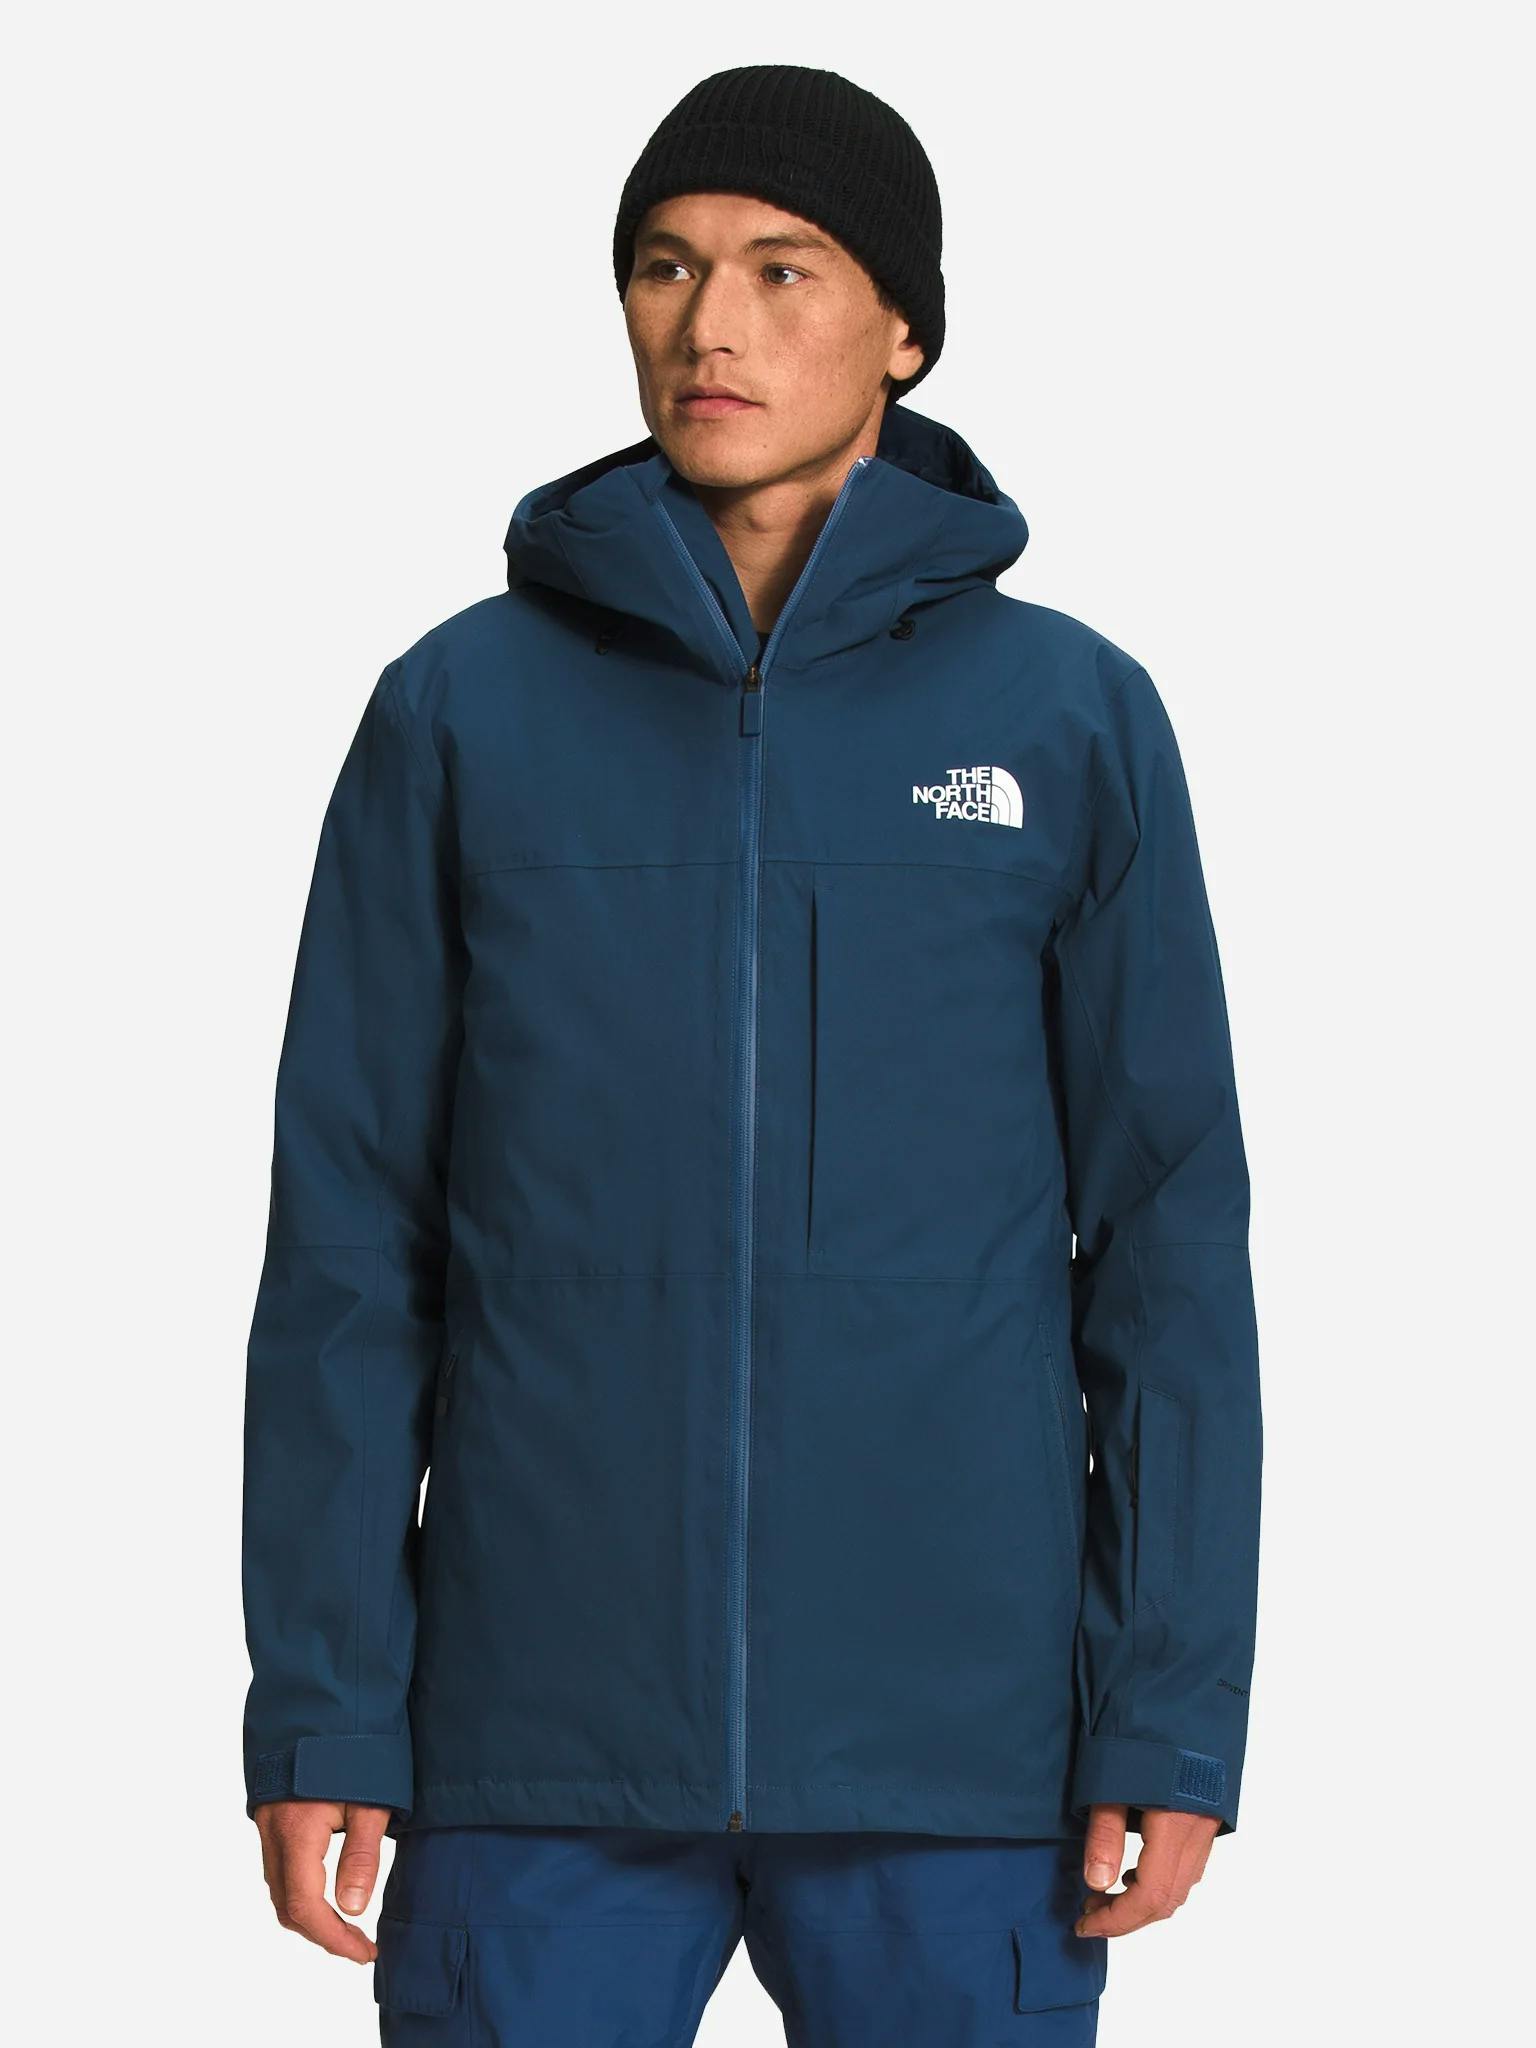 Top The North Face Jackets | Curated.com